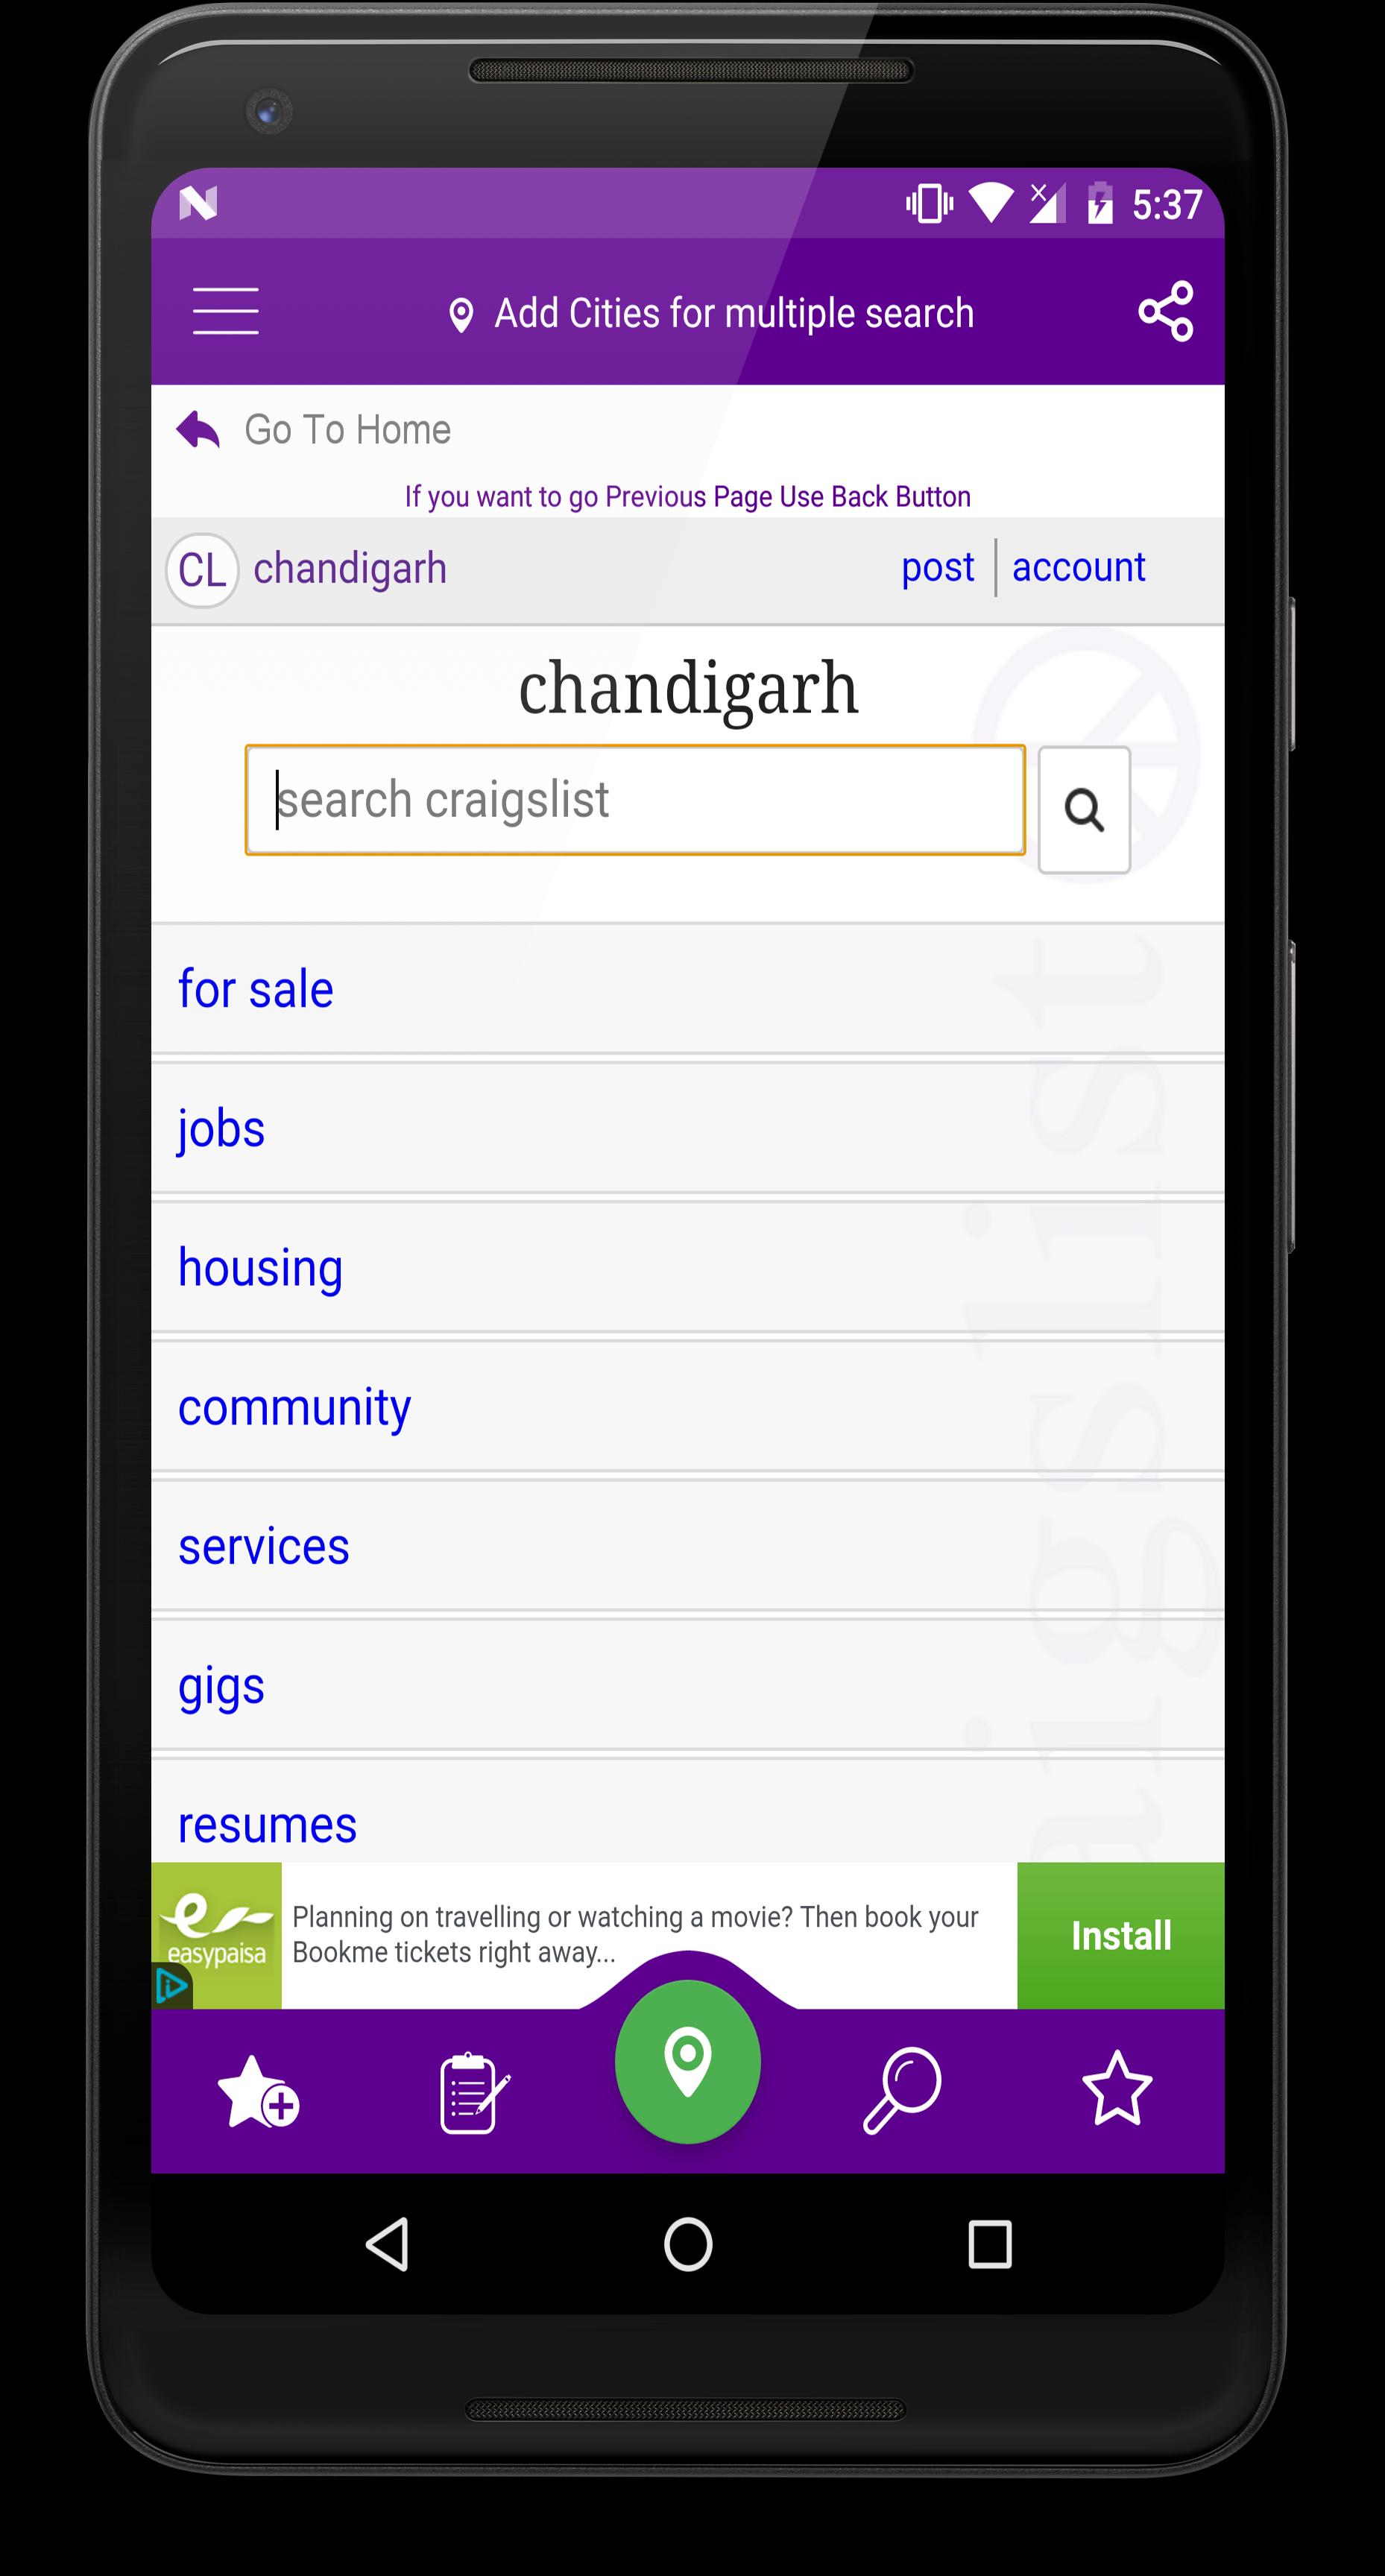 ClPro - Classified Ads Listing for Craigslist for Android ...